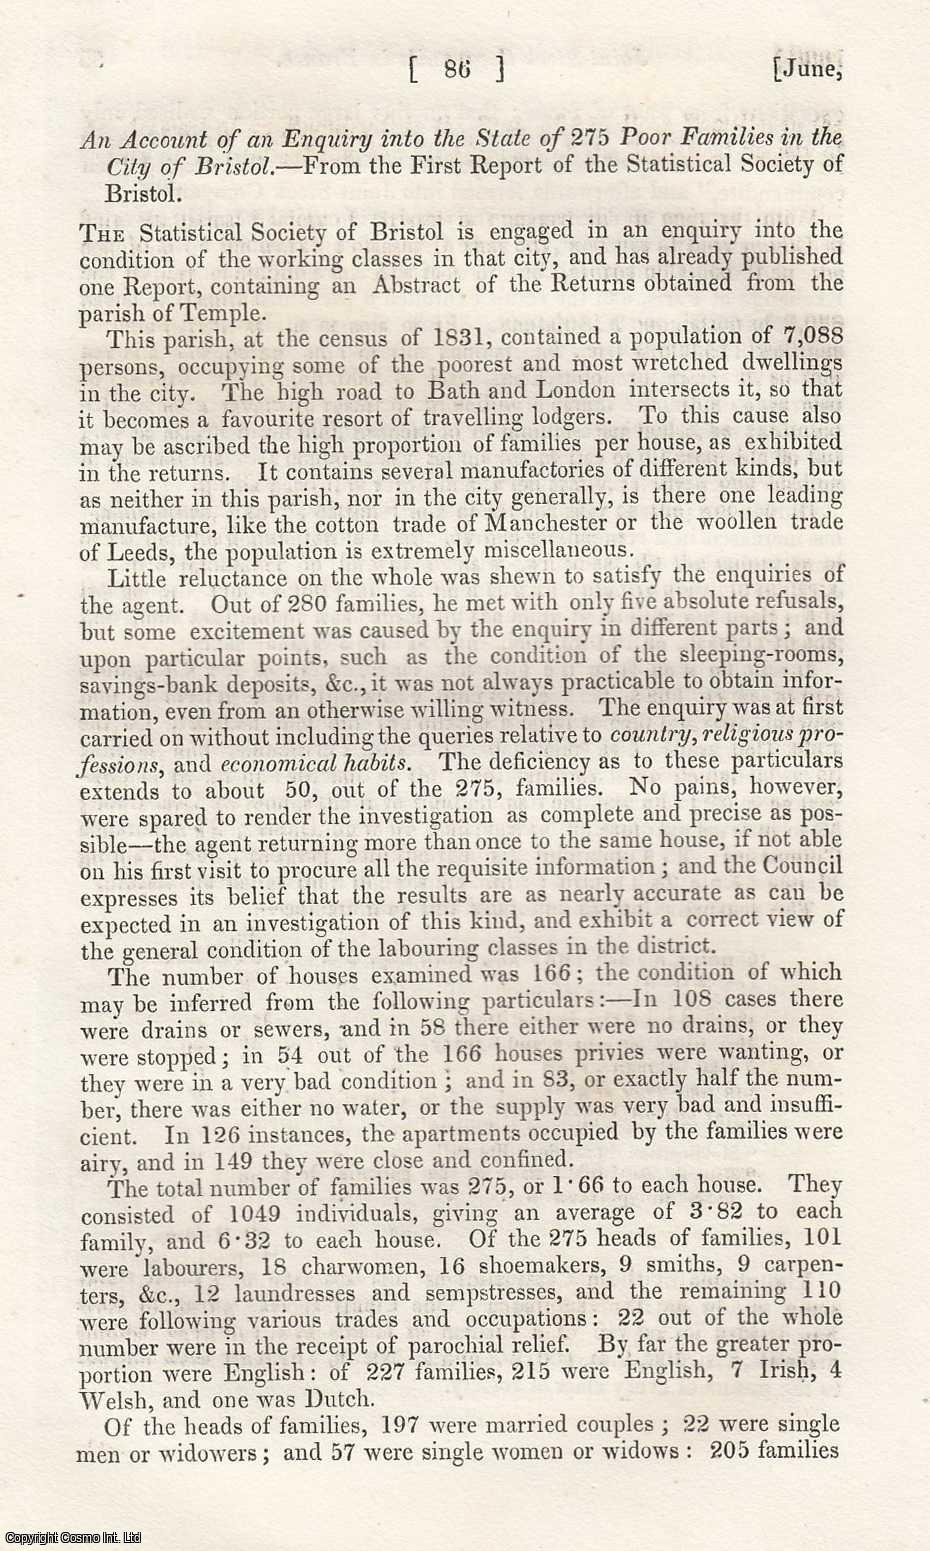 Statistical Society - An Account of an Enquiry into the State of 275 Poor Families in the City of Bristol. A rare original article from the Journal of the Royal Statistical Society of London, 1838.